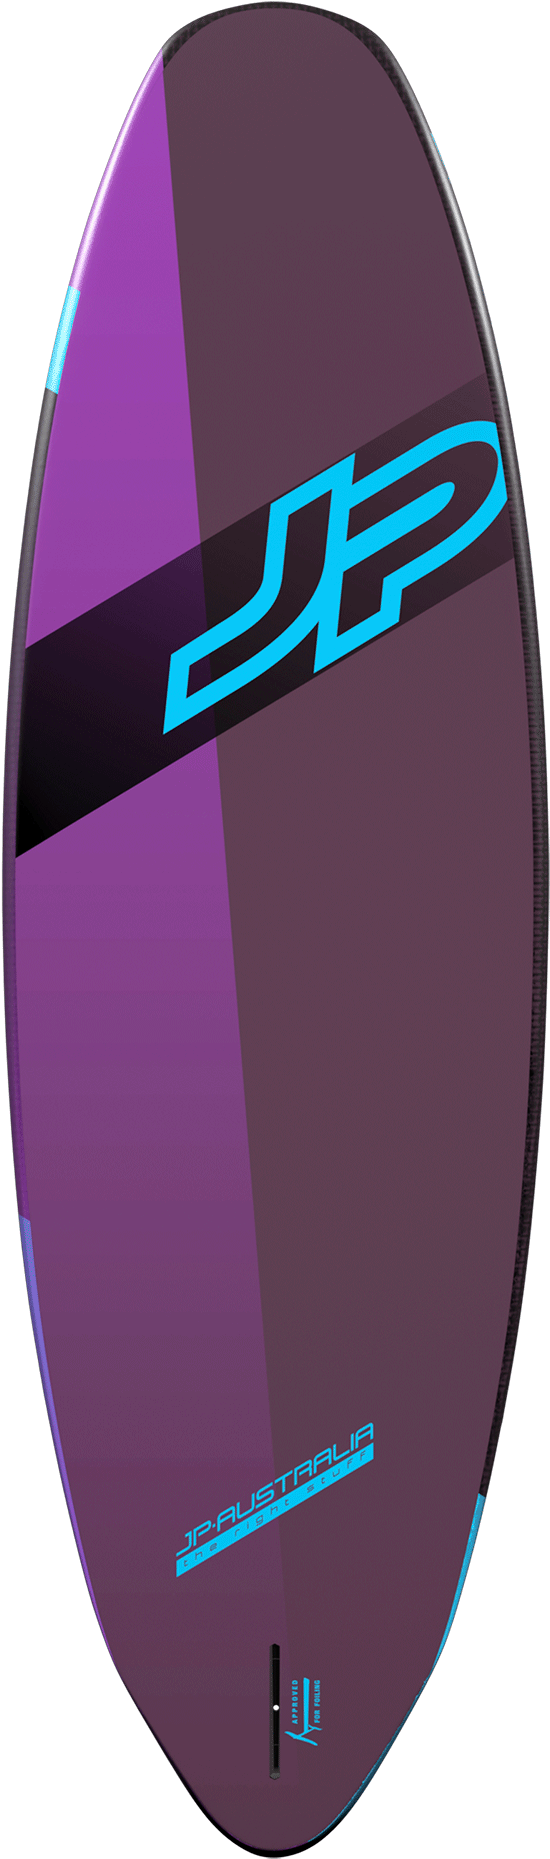 A Purple And Black Rectangular Object With Blue And Black Text